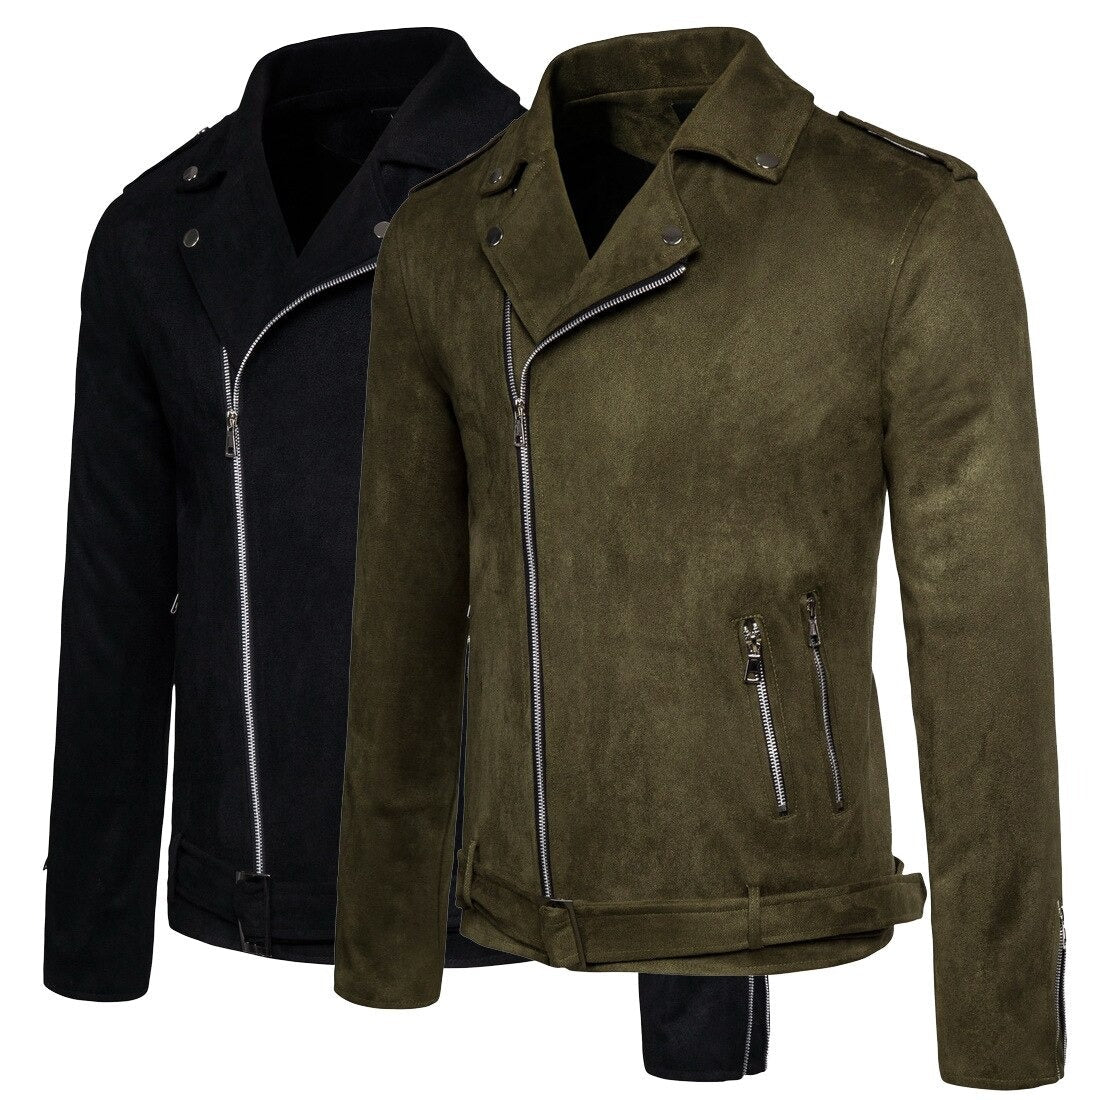 Black and Green Motorcycle Suede Zipper Jacket for Men / Male Jacket and Coat of Slim Outwear - HARD'N'HEAVY